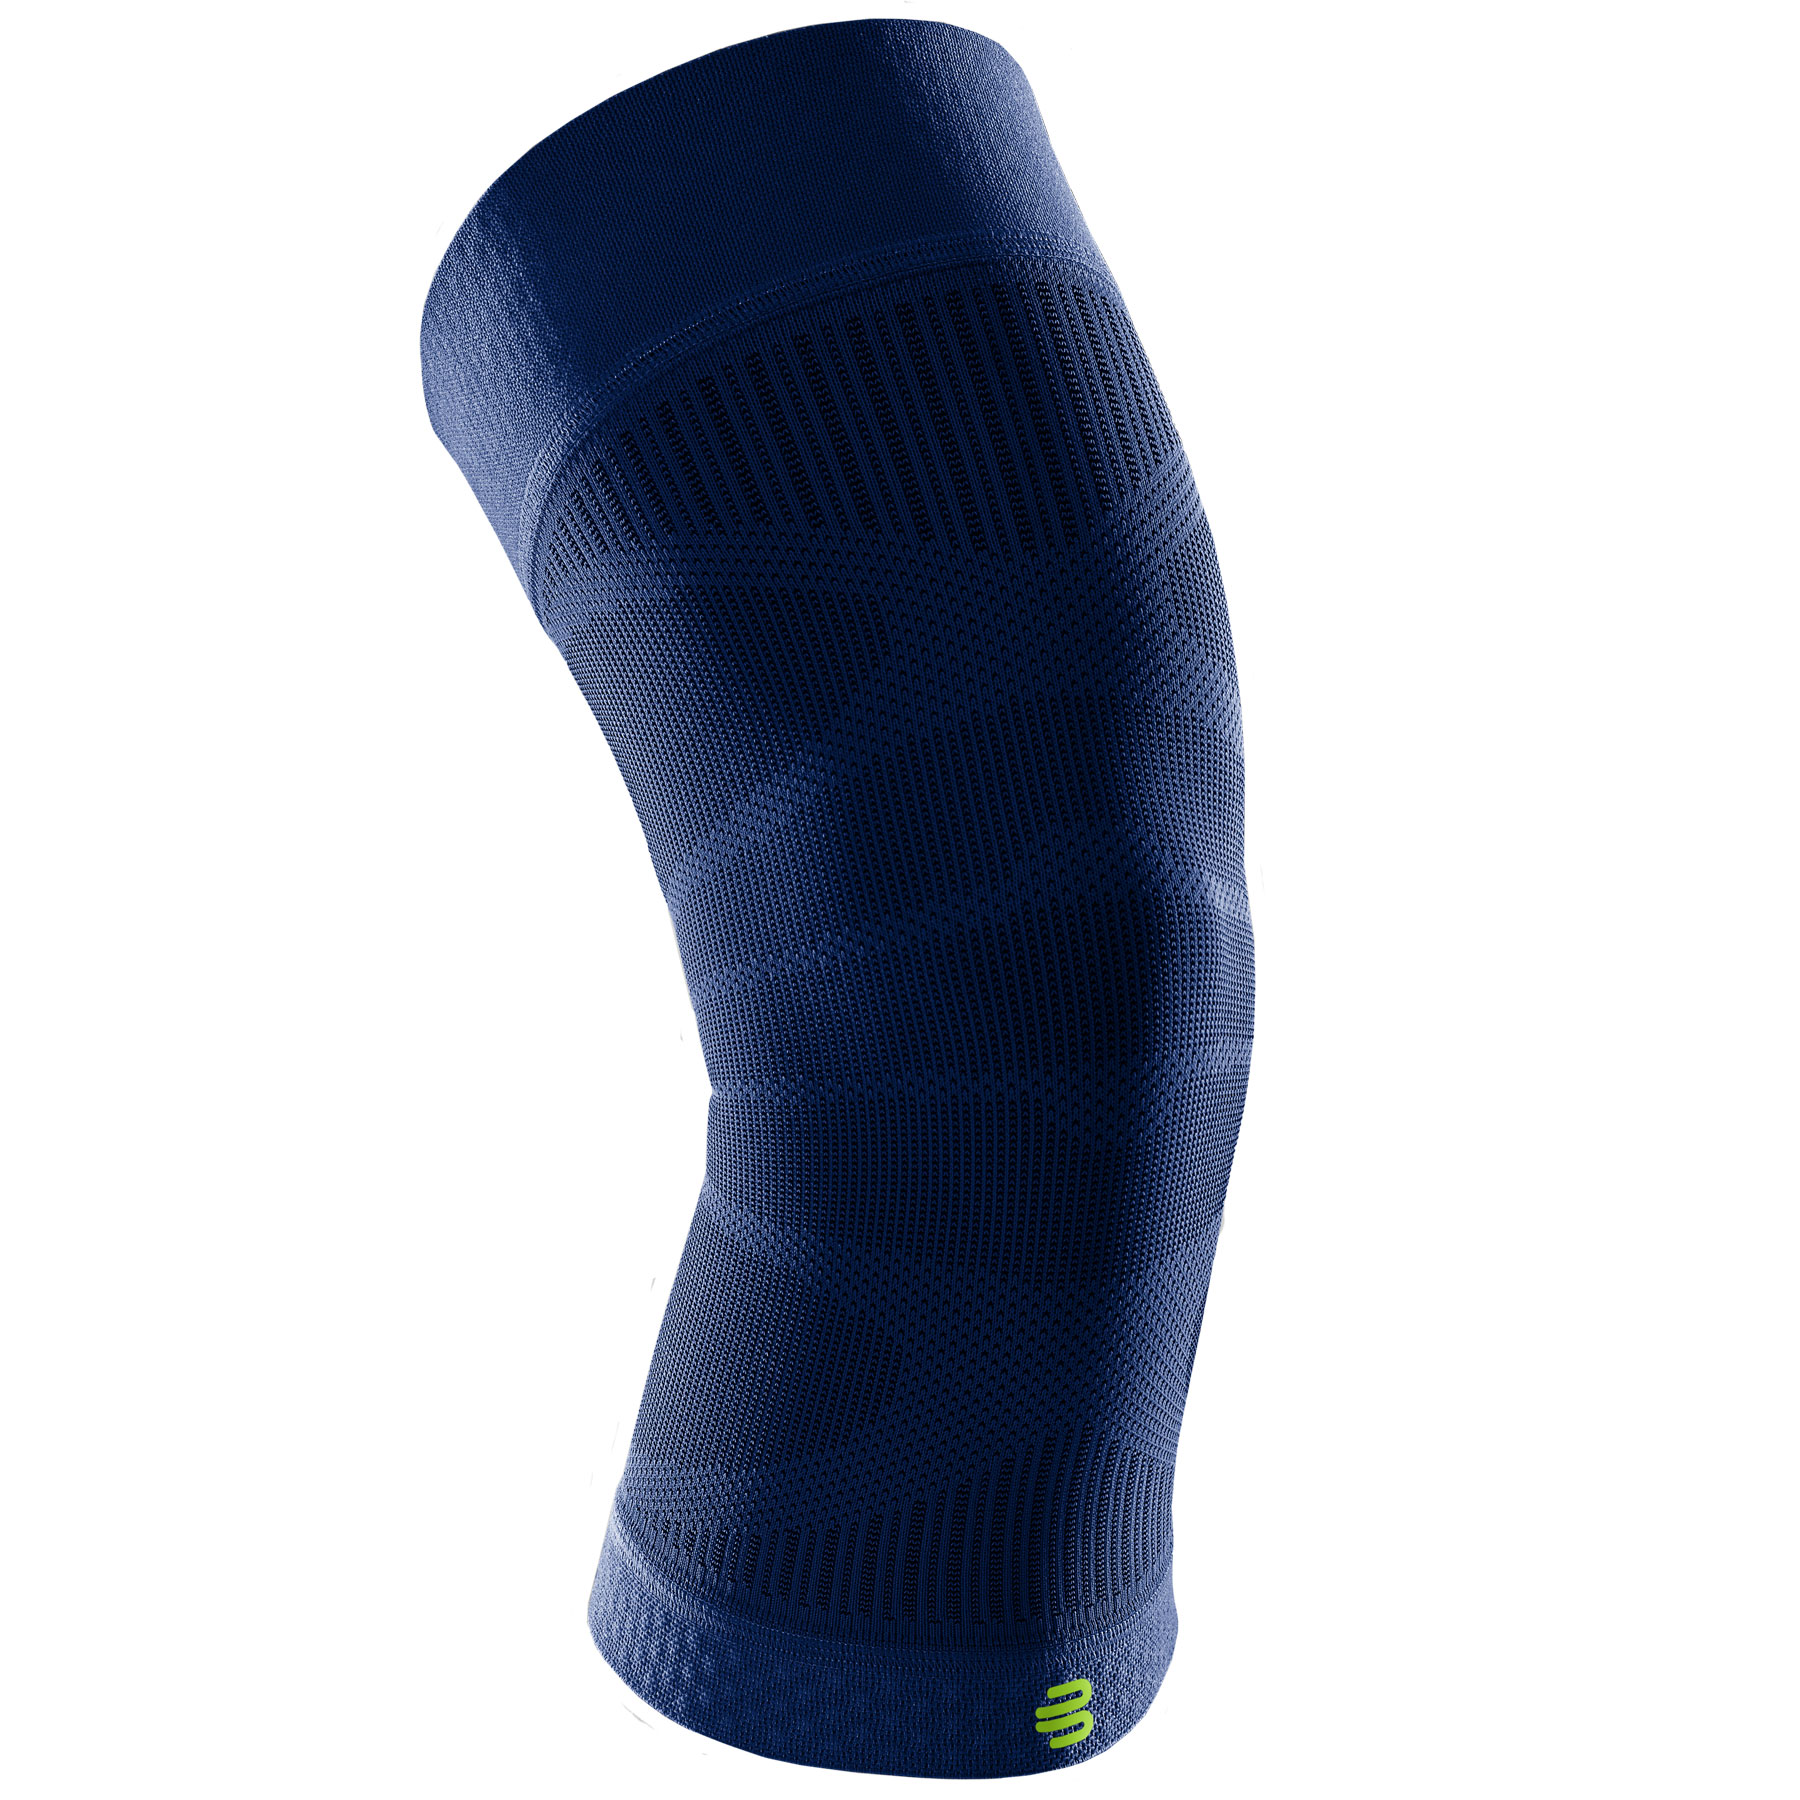 Image of Bauerfeind Sports Compression Knee Support - navy